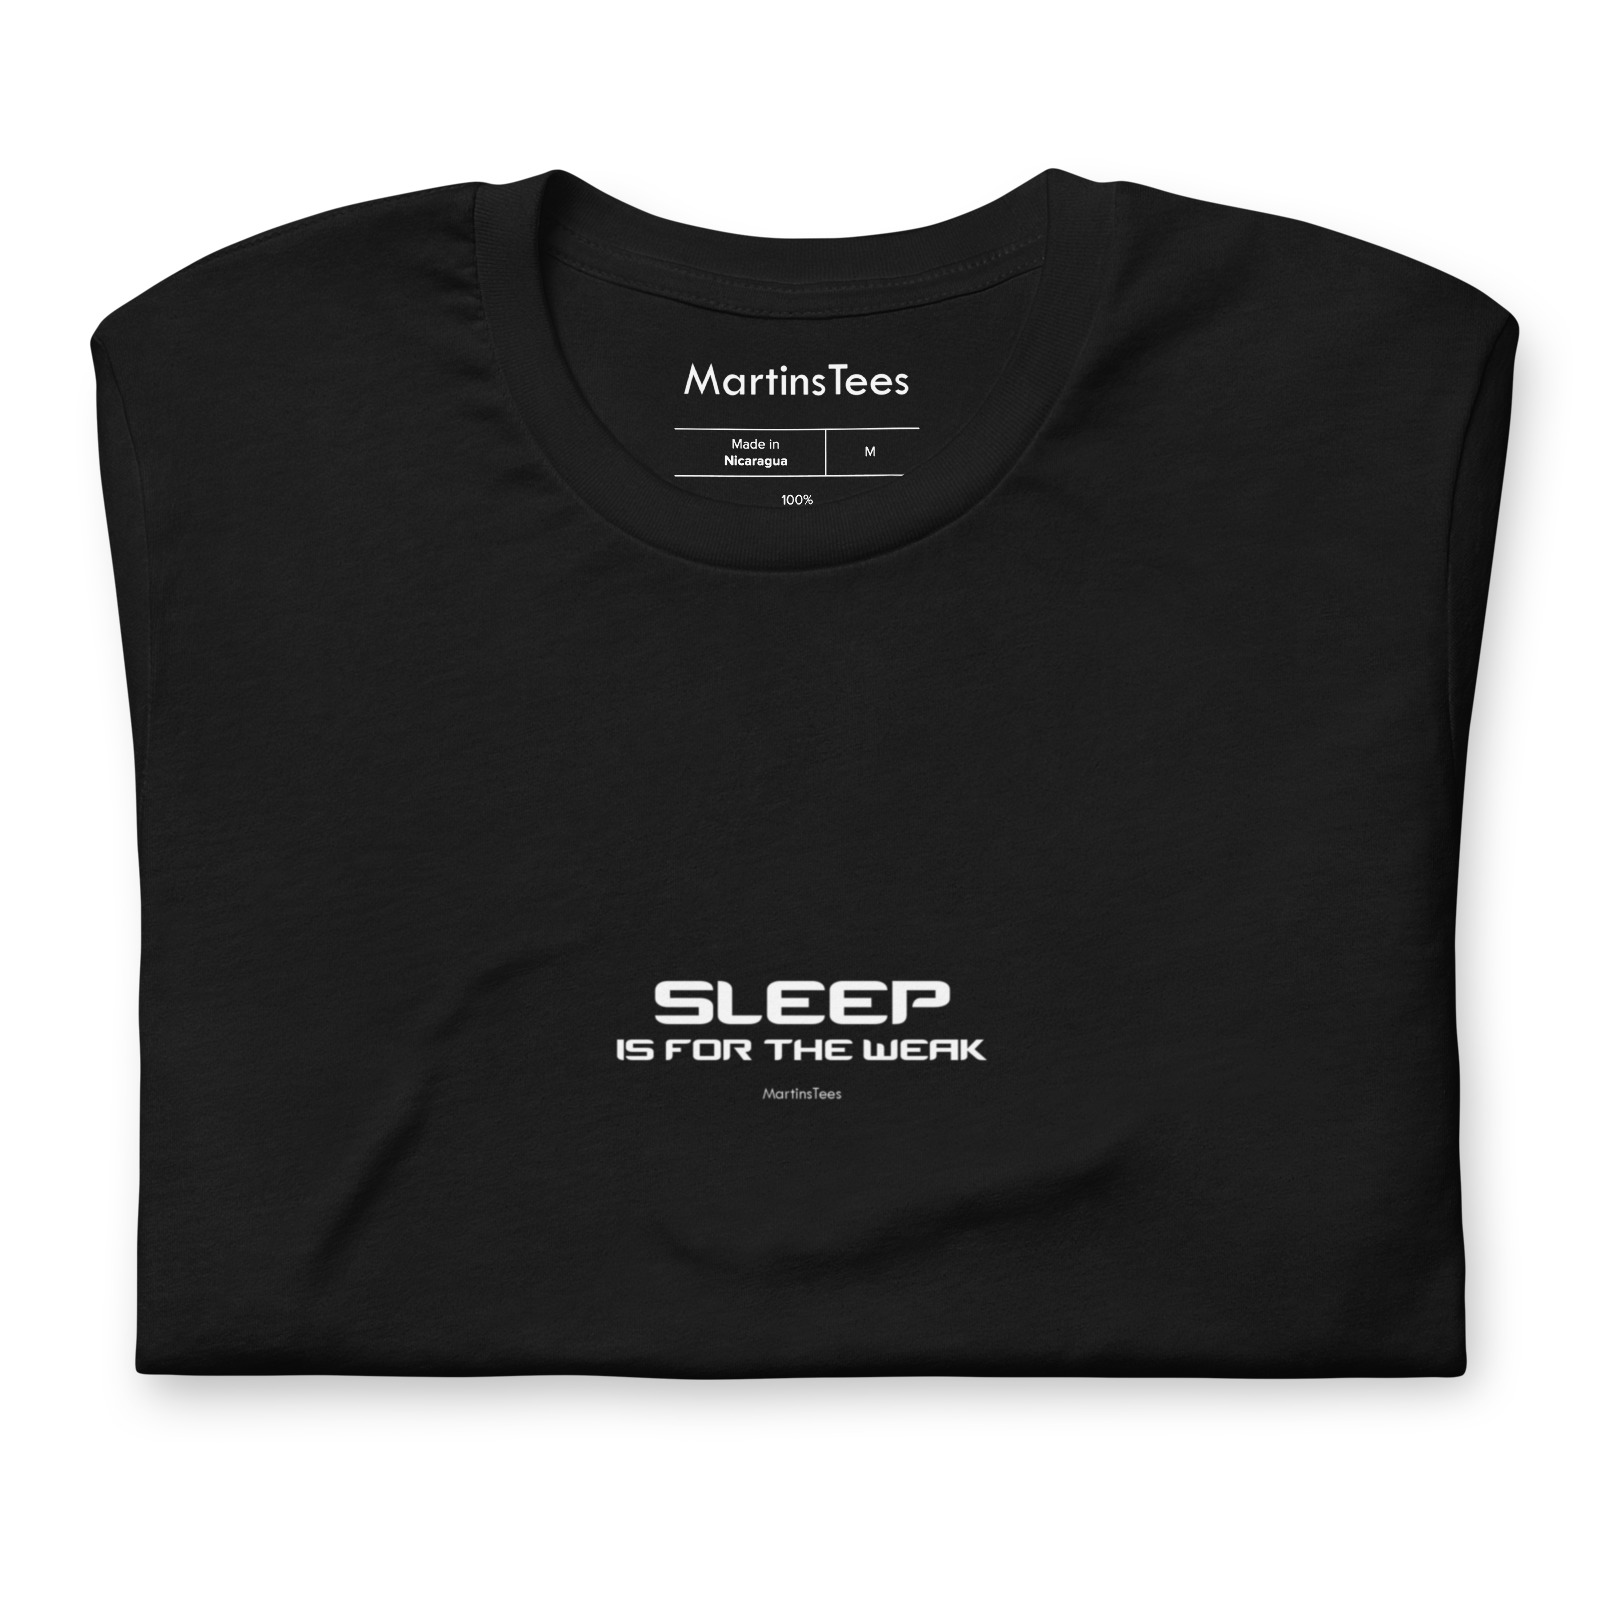 T-shirt: SLEEP - IS FOR THE WEAK